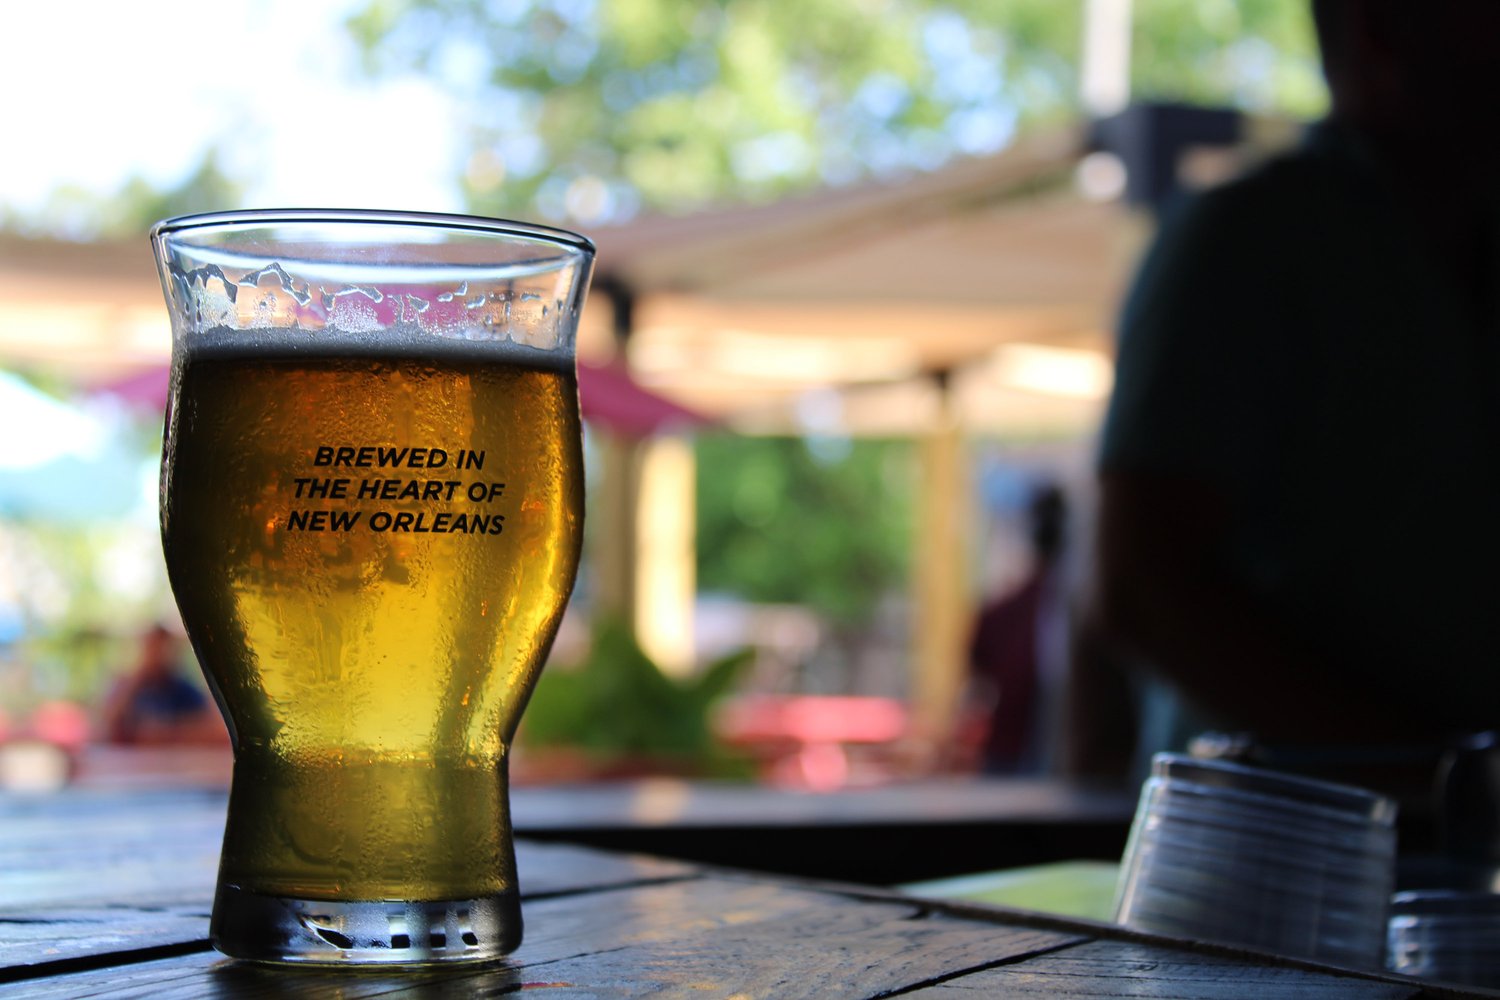 Why Chilling Your Beer Glass Isn't a Waste of Time